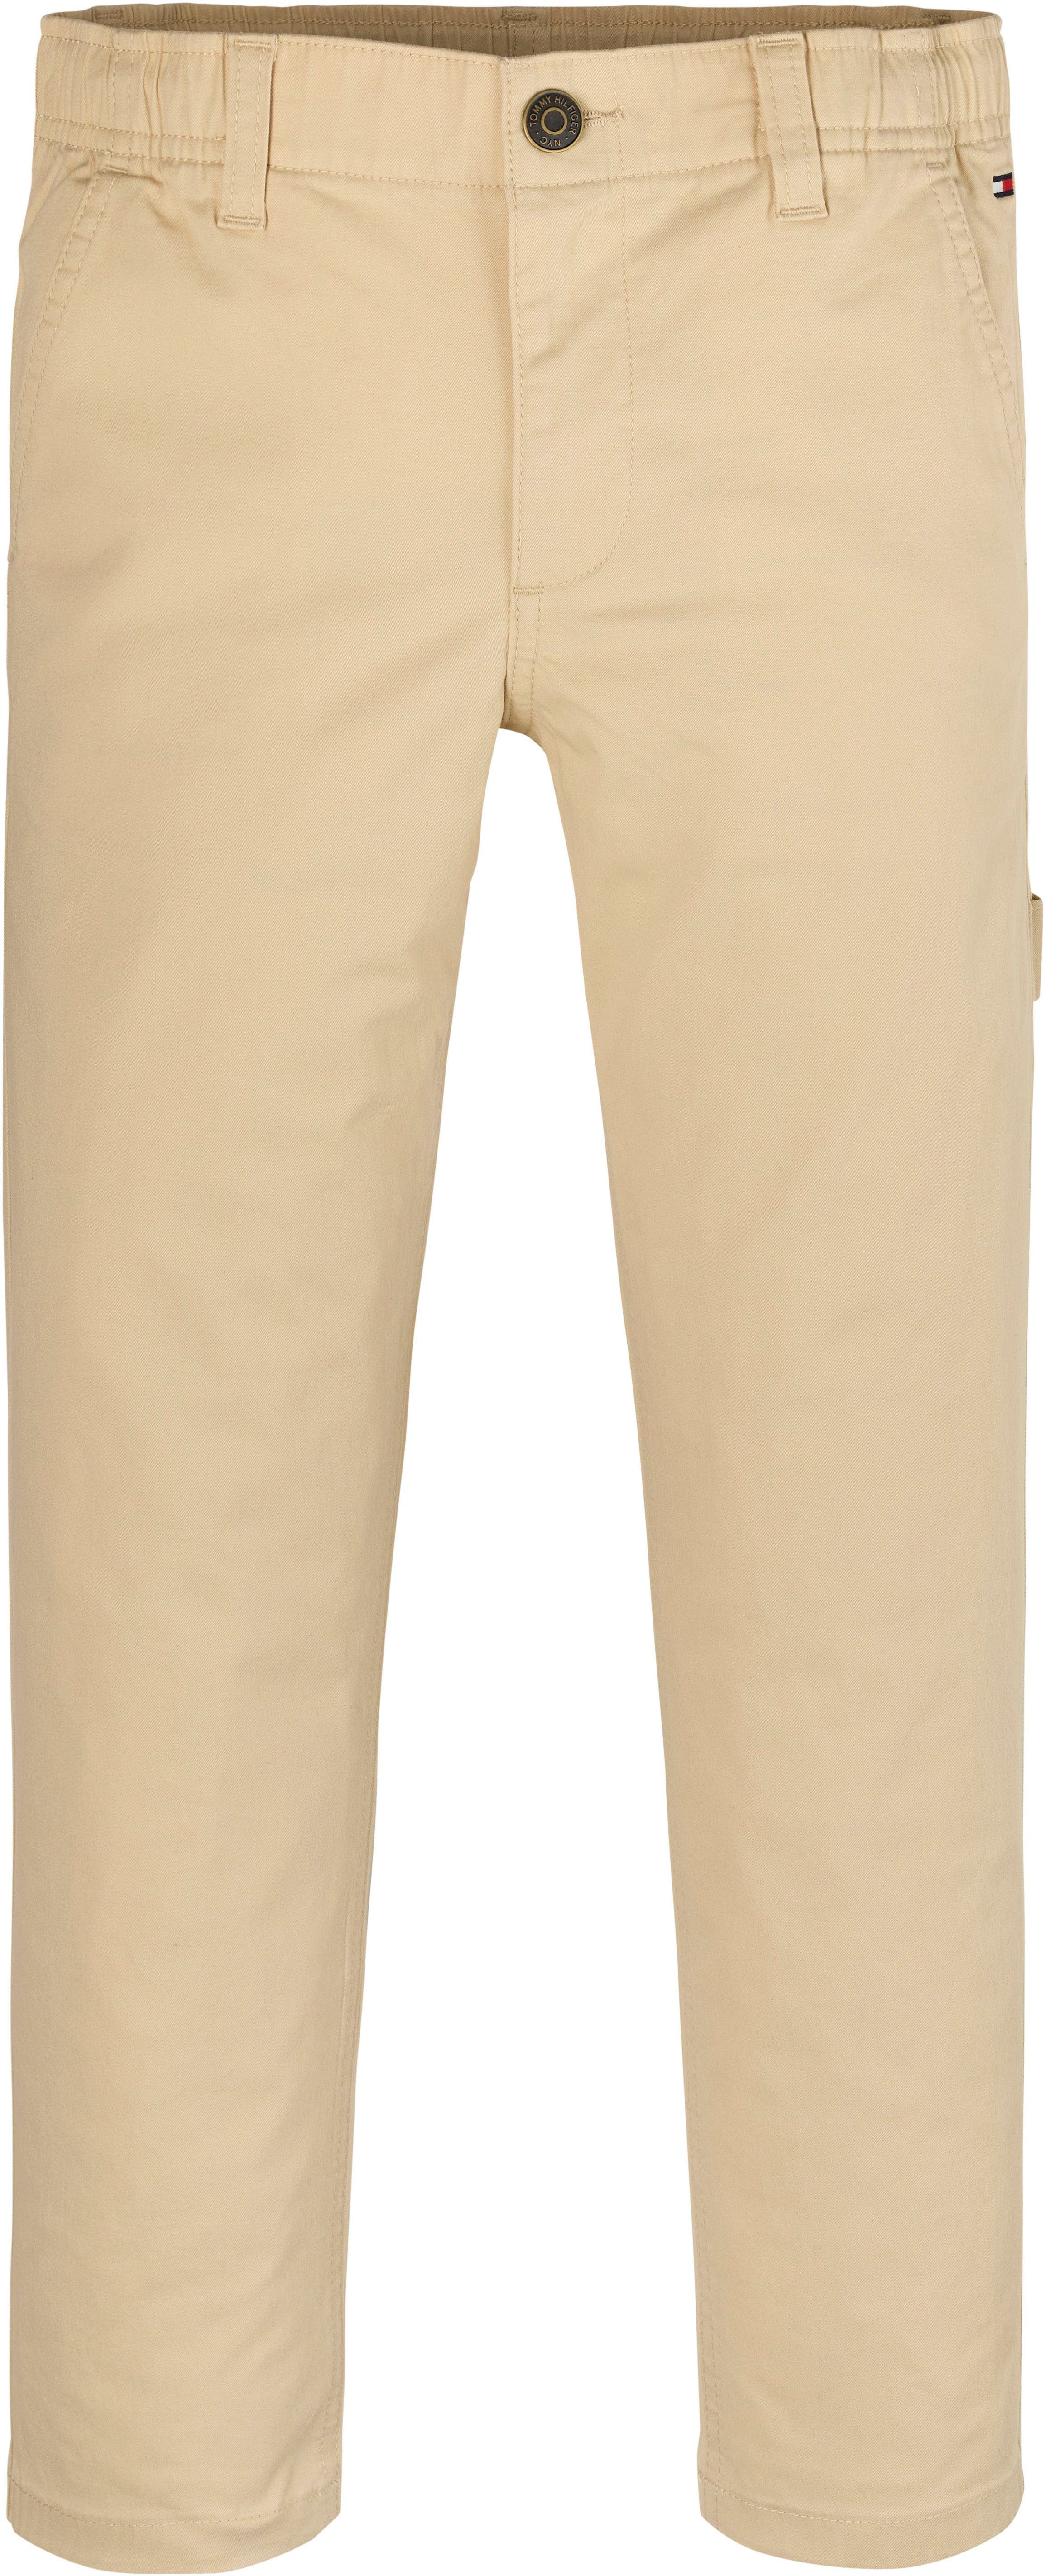 PANTS PULL SKATER mit Webhose Logostickerei ON Tommy Hilfiger WOVEN